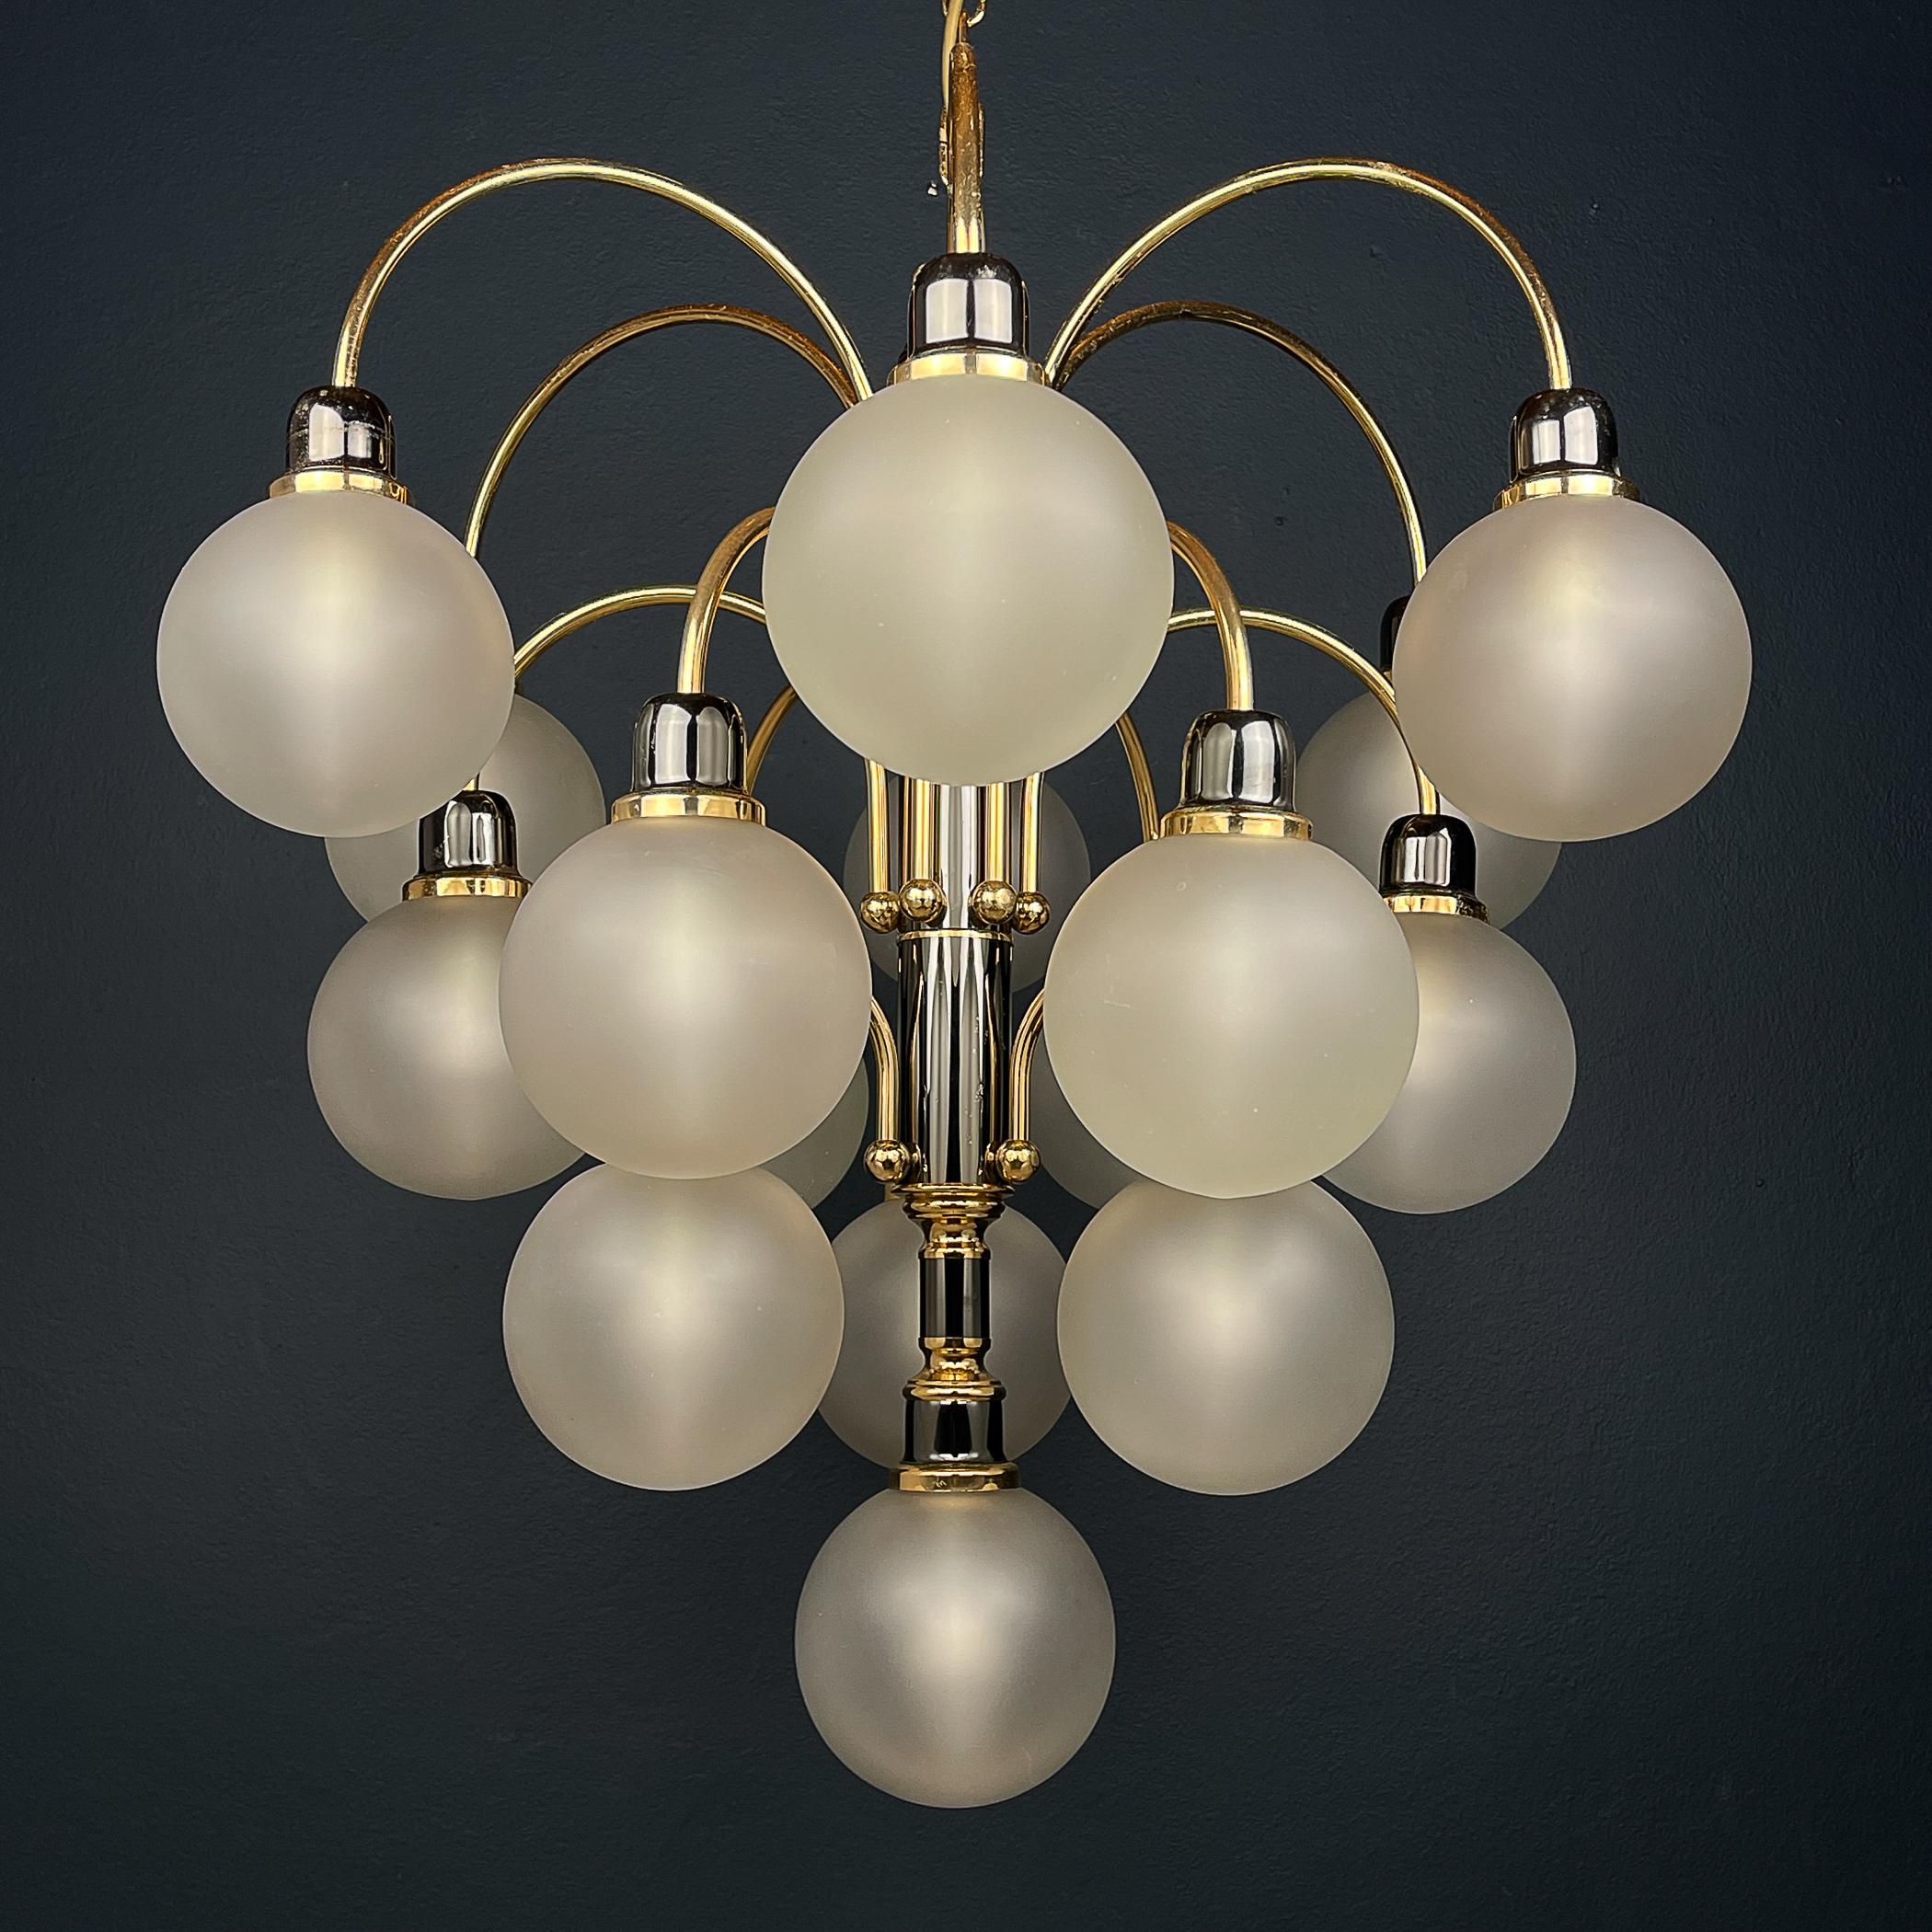 Introducing a striking piece of mid-century modern artistry: the modern ball chandelier by Orion Austria, crafted during the vibrant 1980s. With its sleek spherical design and exquisite craftsmanship, this chandelier embodies the essence of vintage